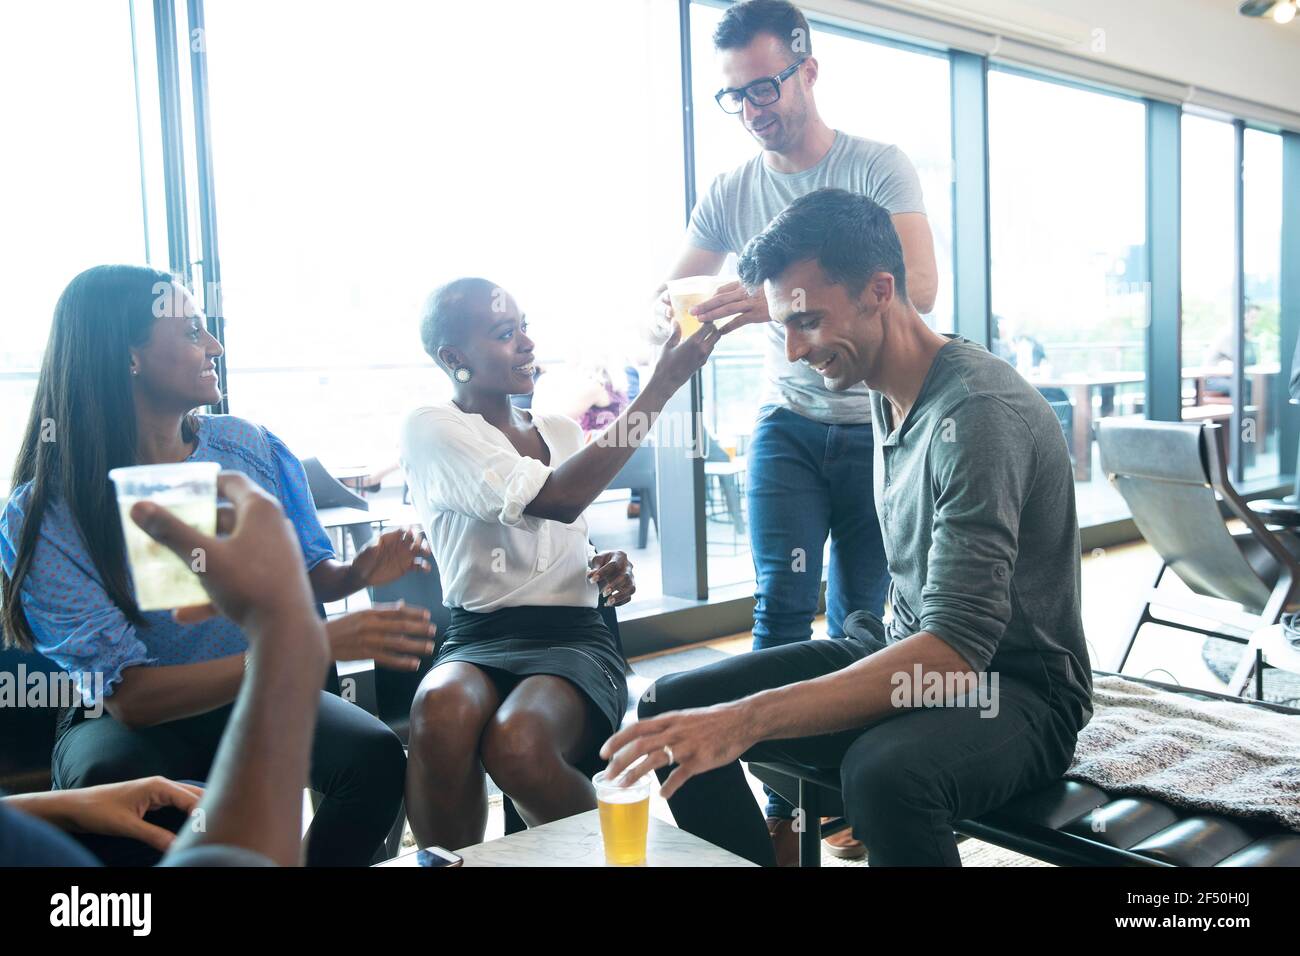 Business people celebrating with beers in office Stock Photo